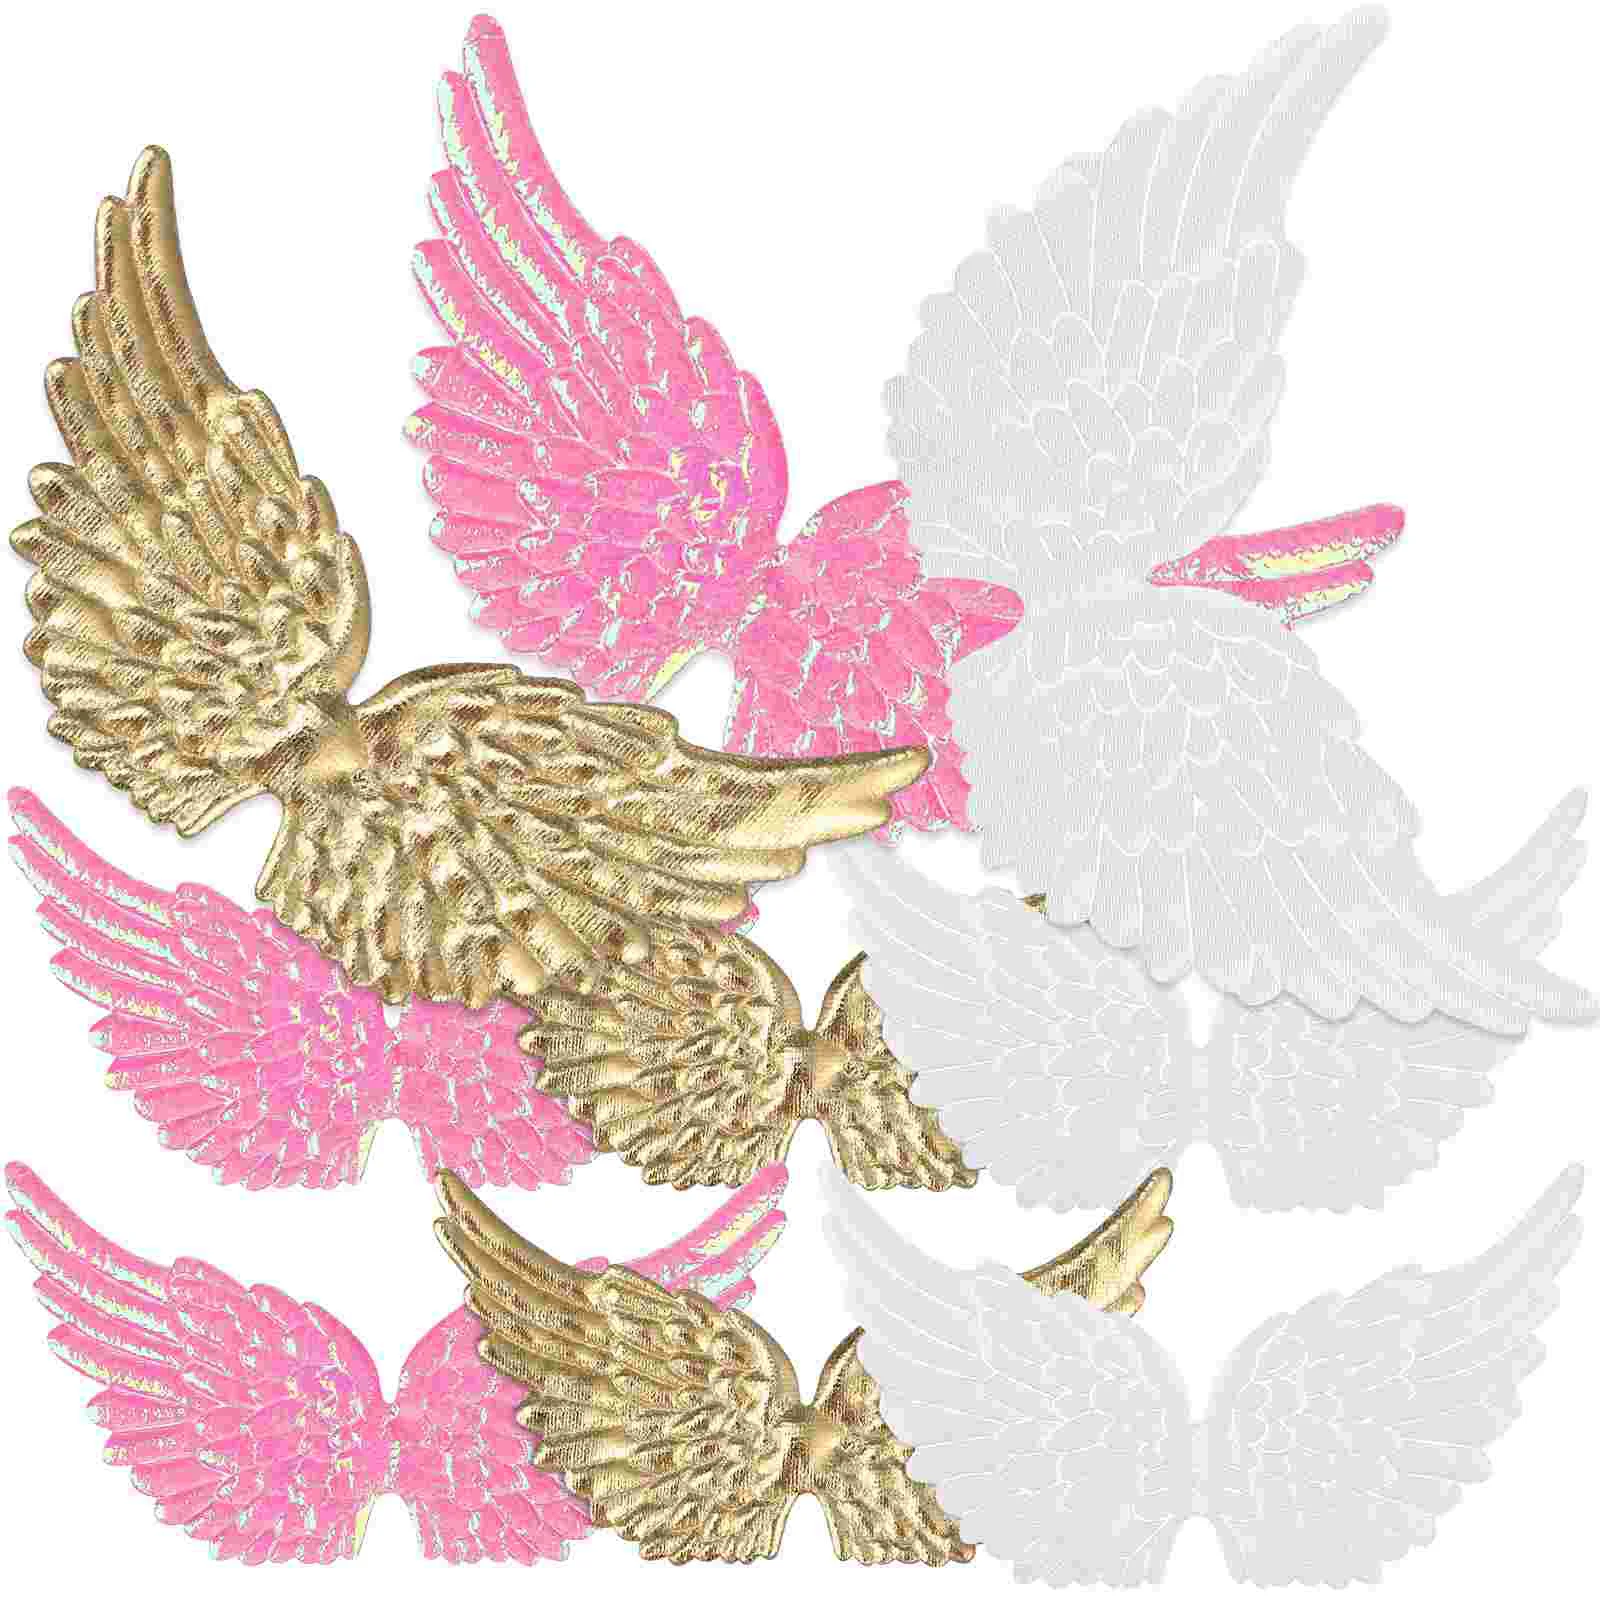 

36 Pcs Embroidery Accessories Angel Wings Crafts Miniature Patches Christmas Backpack Accessory Projects Fabric Decorative Girl